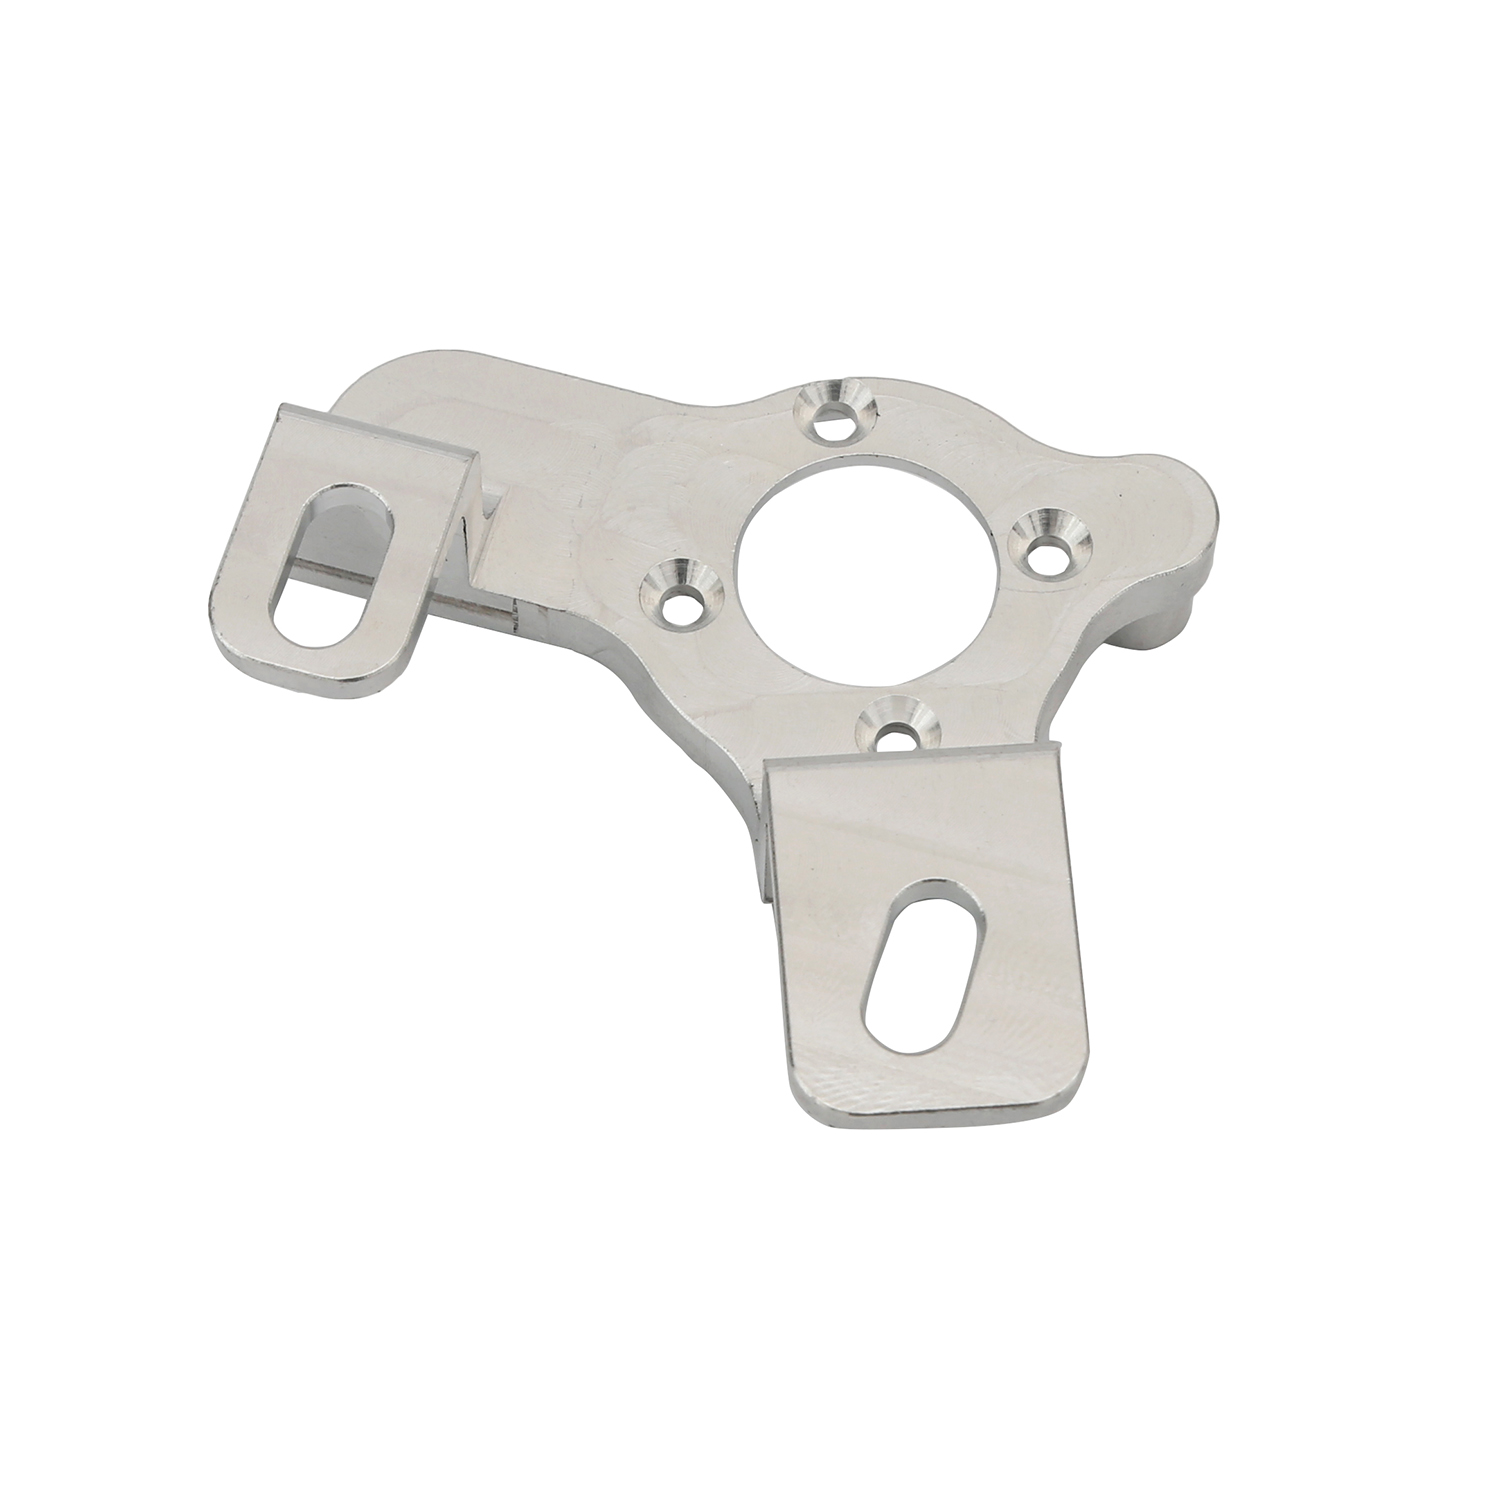 OEM Nonstandard Support Bracket Mount Bracket 5 Axis Cnc Machining Milling Customized Stainless-Steel Adapter for Medical Device